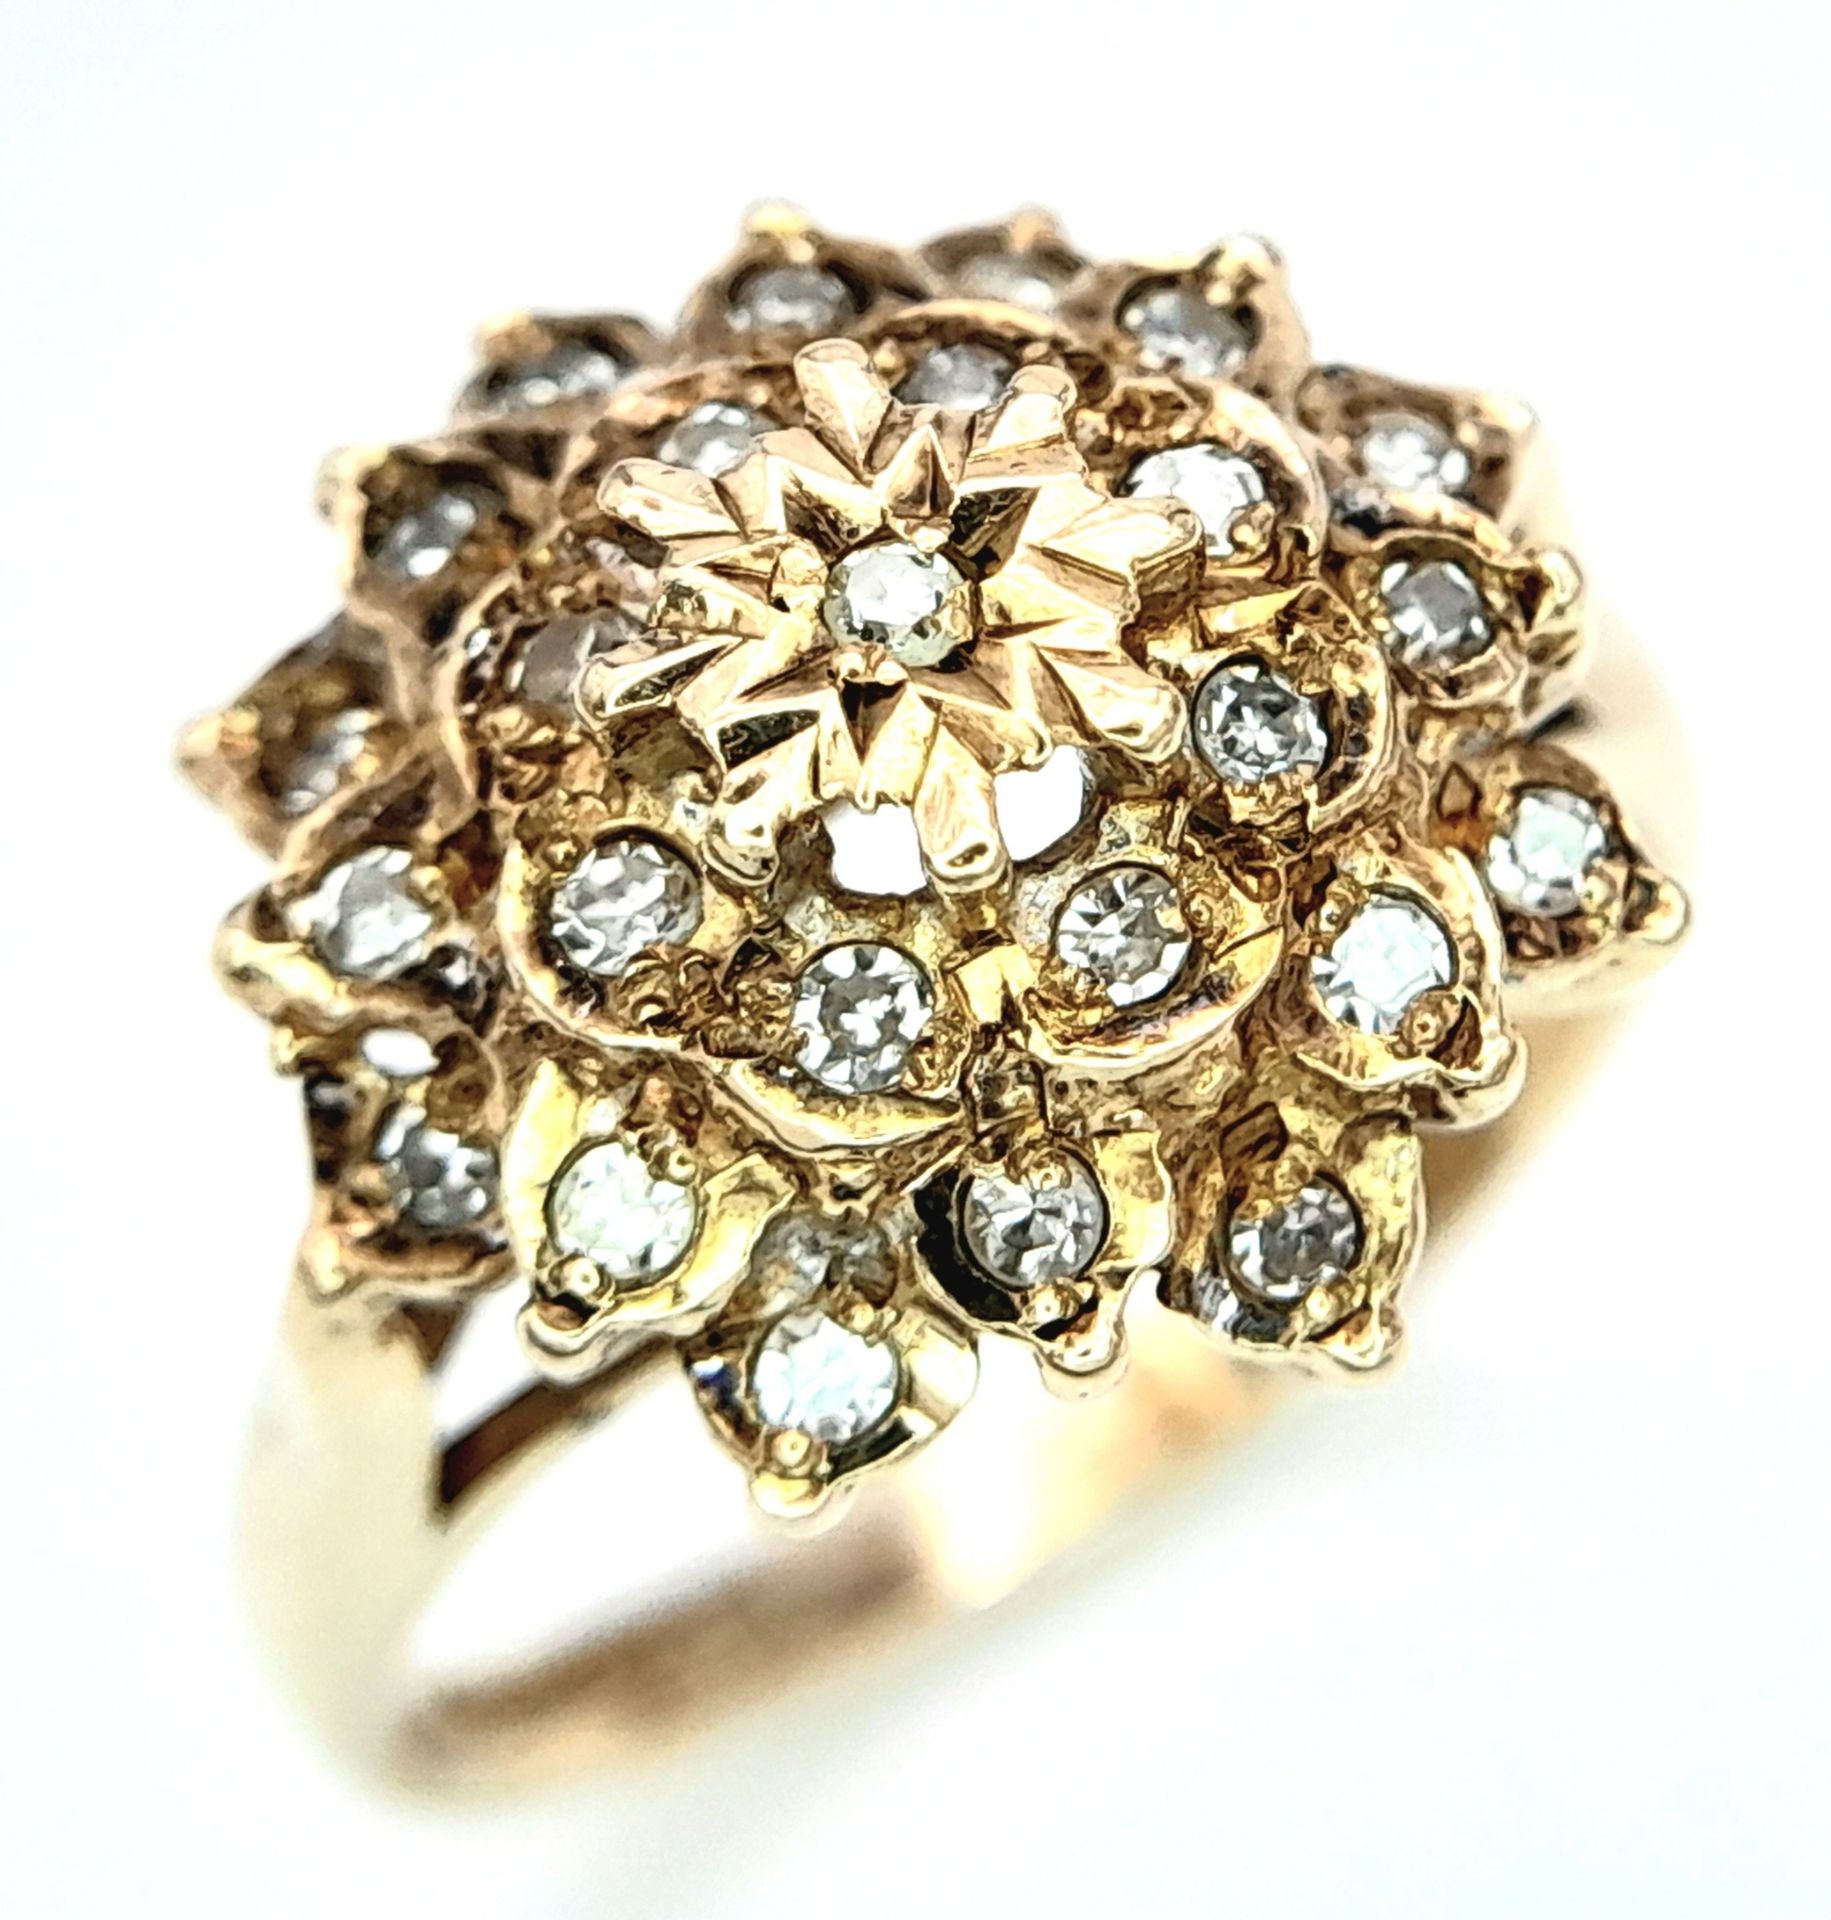 A 9K YELLOW GOLD DIAMOND CLUSTER RING. Size J, 2.8g total weight. Ref: SC 8032 - Image 2 of 6